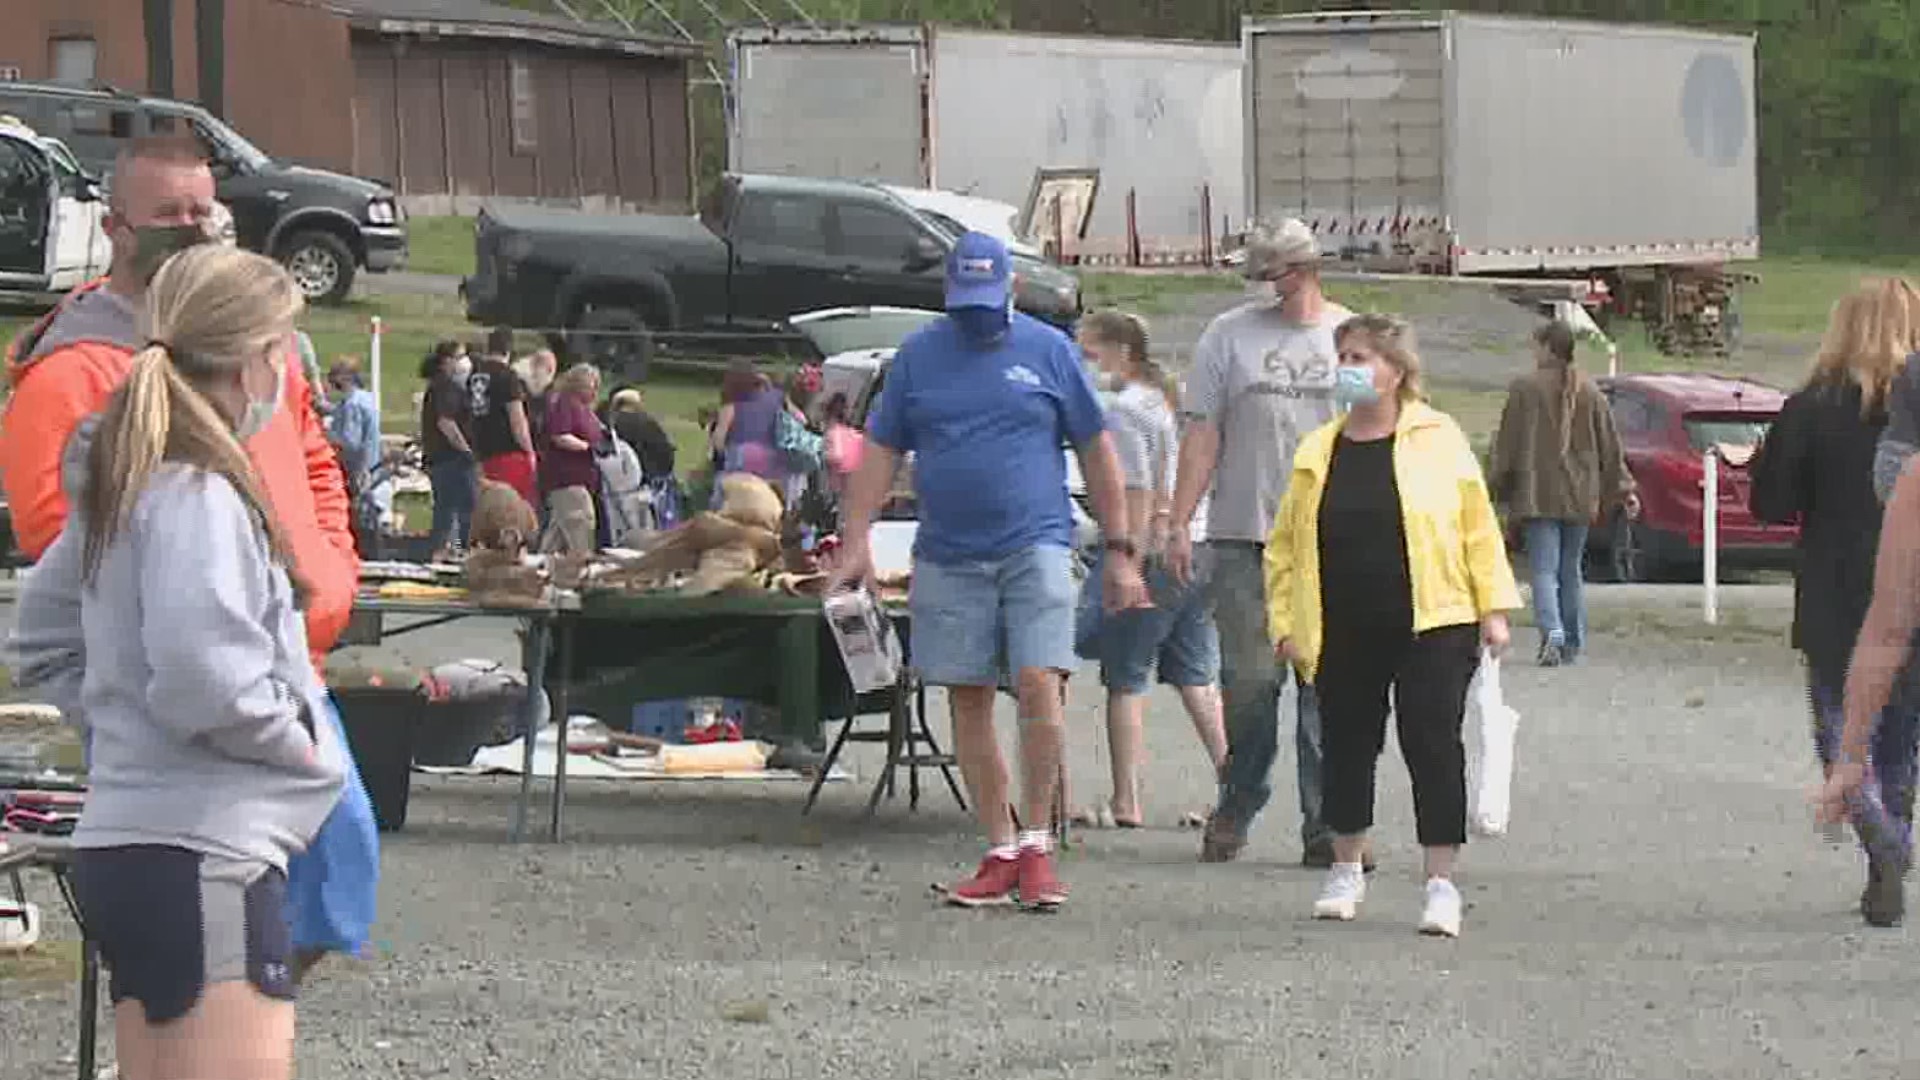 A flea market in Lackawanna County opened Sunday despite the county still being under Governor Wolf's stay at home order.